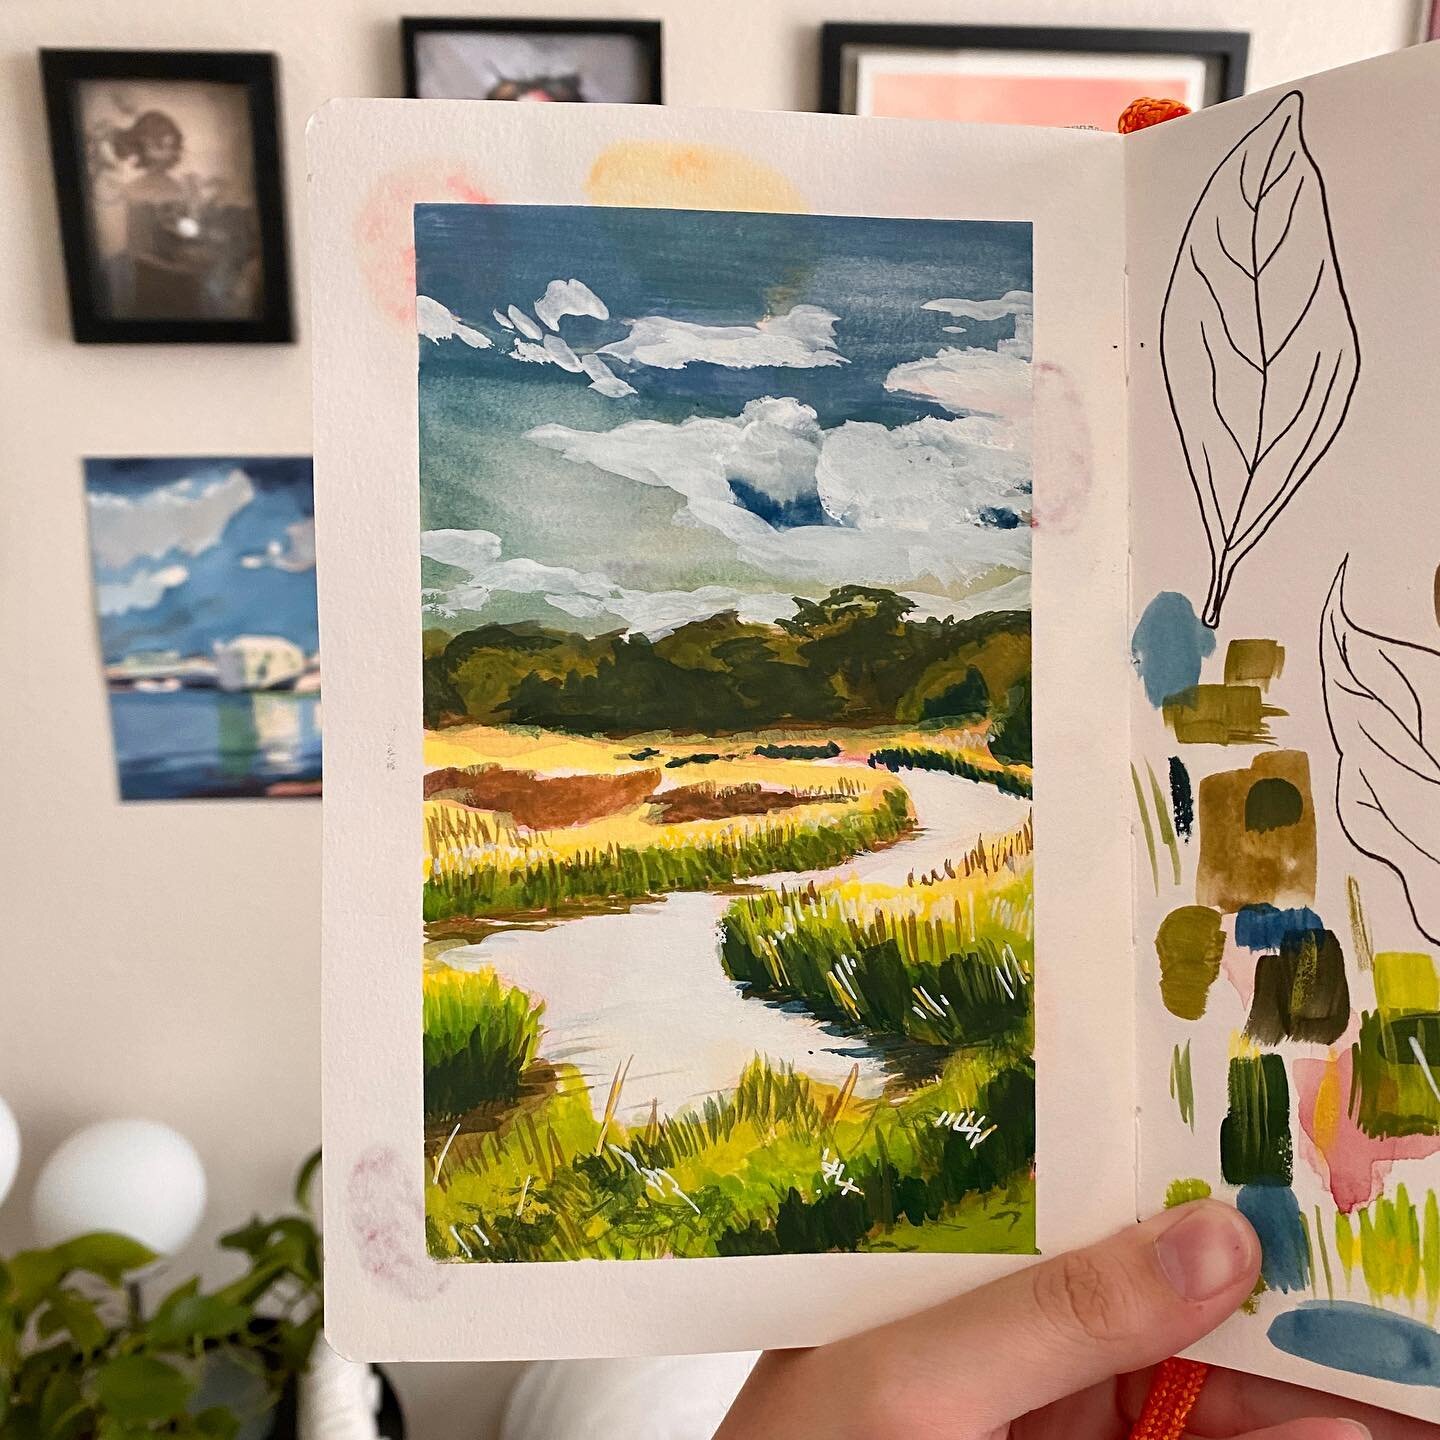 25/365 river landscape. Reference in my bio! This was fun to paint ☺️🏞

#the100dayproject #dailydrawing #draw365 #artchallenge #monicabrazil_art #jellygouache #gouachepainting #sketchbookinspo